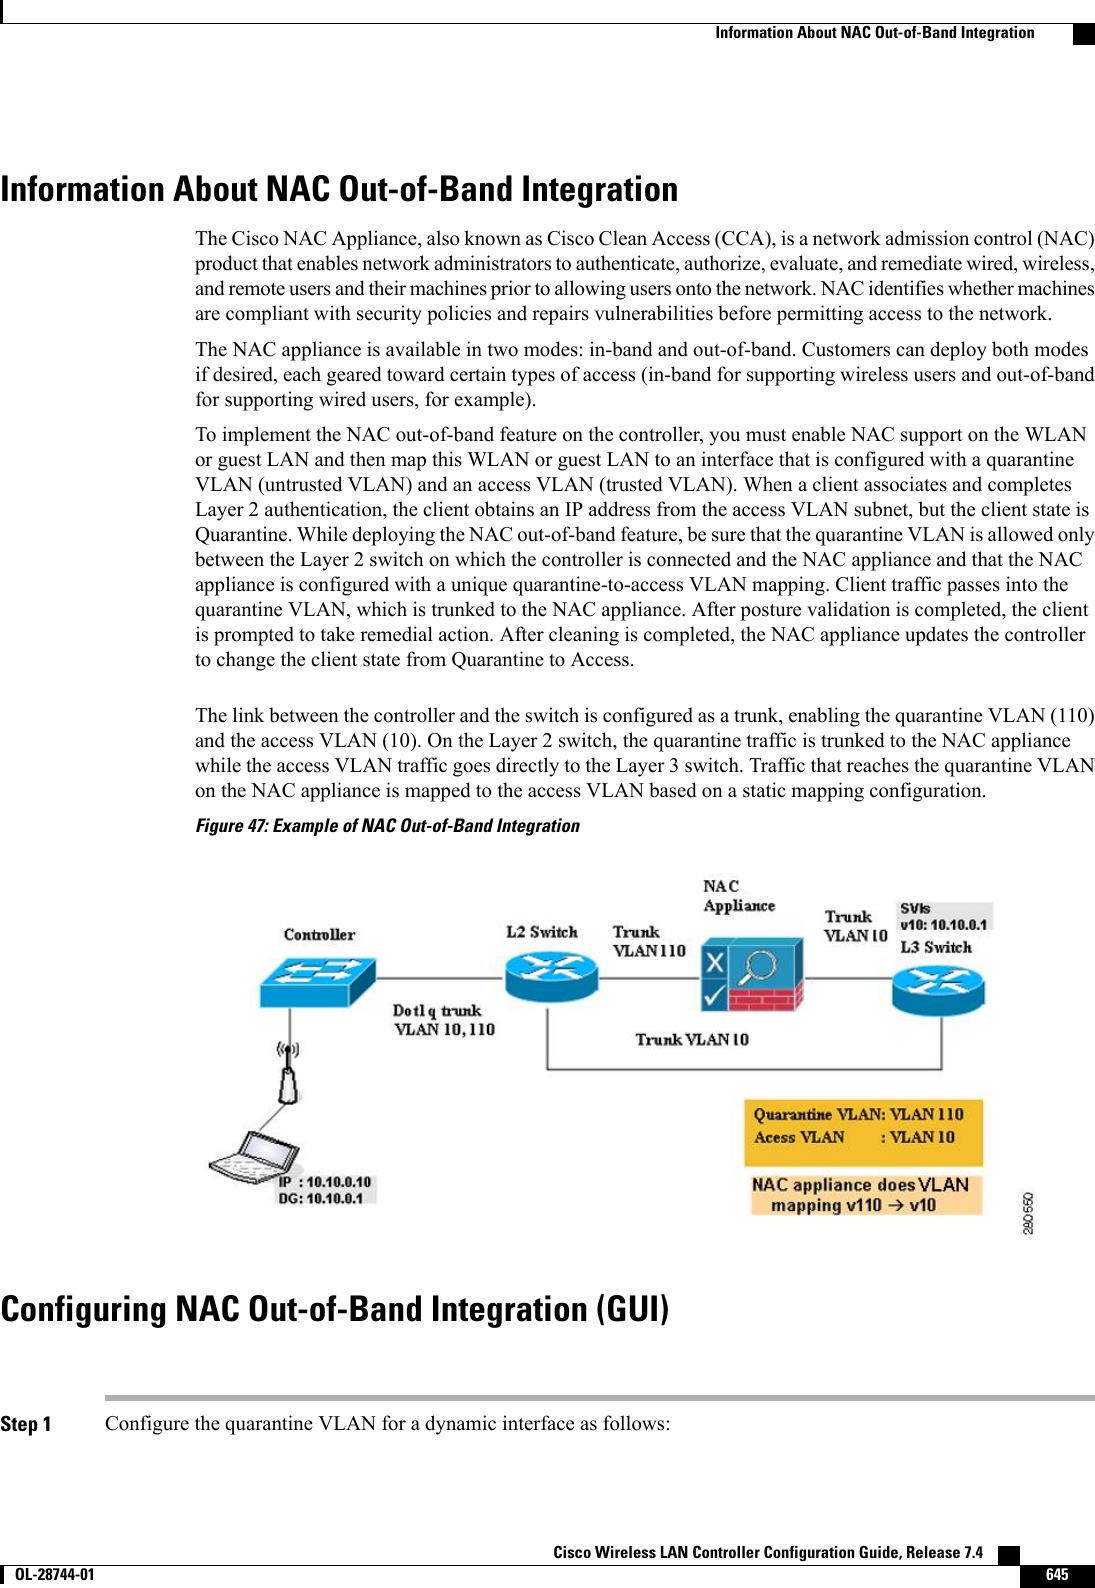 Information About NAC Out-of-Band IntegrationThe Cisco NAC Appliance, also known as Cisco Clean Access (CCA), is a network admission control (NAC)product that enables network administrators to authenticate, authorize, evaluate, and remediate wired, wireless,and remote users and their machines prior to allowing users onto the network. NAC identifies whether machinesare compliant with security policies and repairs vulnerabilities before permitting access to the network.The NAC appliance is available in two modes: in-band and out-of-band. Customers can deploy both modesif desired, each geared toward certain types of access (in-band for supporting wireless users and out-of-bandfor supporting wired users, for example).To implement the NAC out-of-band feature on the controller, you must enable NAC support on the WLANor guest LAN and then map this WLAN or guest LAN to an interface that is configured with a quarantineVLAN (untrusted VLAN) and an access VLAN (trusted VLAN). When a client associates and completesLayer 2 authentication, the client obtains an IP address from the access VLAN subnet, but the client state isQuarantine. While deploying the NAC out-of-band feature, be sure that the quarantine VLAN is allowed onlybetween the Layer 2 switch on which the controller is connected and the NAC appliance and that the NACappliance is configured with a unique quarantine-to-access VLAN mapping. Client traffic passes into thequarantine VLAN, which is trunked to the NAC appliance. After posture validation is completed, the clientis prompted to take remedial action. After cleaning is completed, the NAC appliance updates the controllerto change the client state from Quarantine to Access.The link between the controller and the switch is configured as a trunk, enabling the quarantine VLAN (110)and the access VLAN (10). On the Layer 2 switch, the quarantine traffic is trunked to the NAC appliancewhile the access VLAN traffic goes directly to the Layer 3 switch. Traffic that reaches the quarantine VLANon the NAC appliance is mapped to the access VLAN based on a static mapping configuration.Figure 47: Example of NAC Out-of-Band IntegrationConfiguring NAC Out-of-Band Integration (GUI)Step 1 Configure the quarantine VLAN for a dynamic interface as follows:Cisco Wireless LAN Controller Configuration Guide, Release 7.4       OL-28744-01 645Information About NAC Out-of-Band Integration